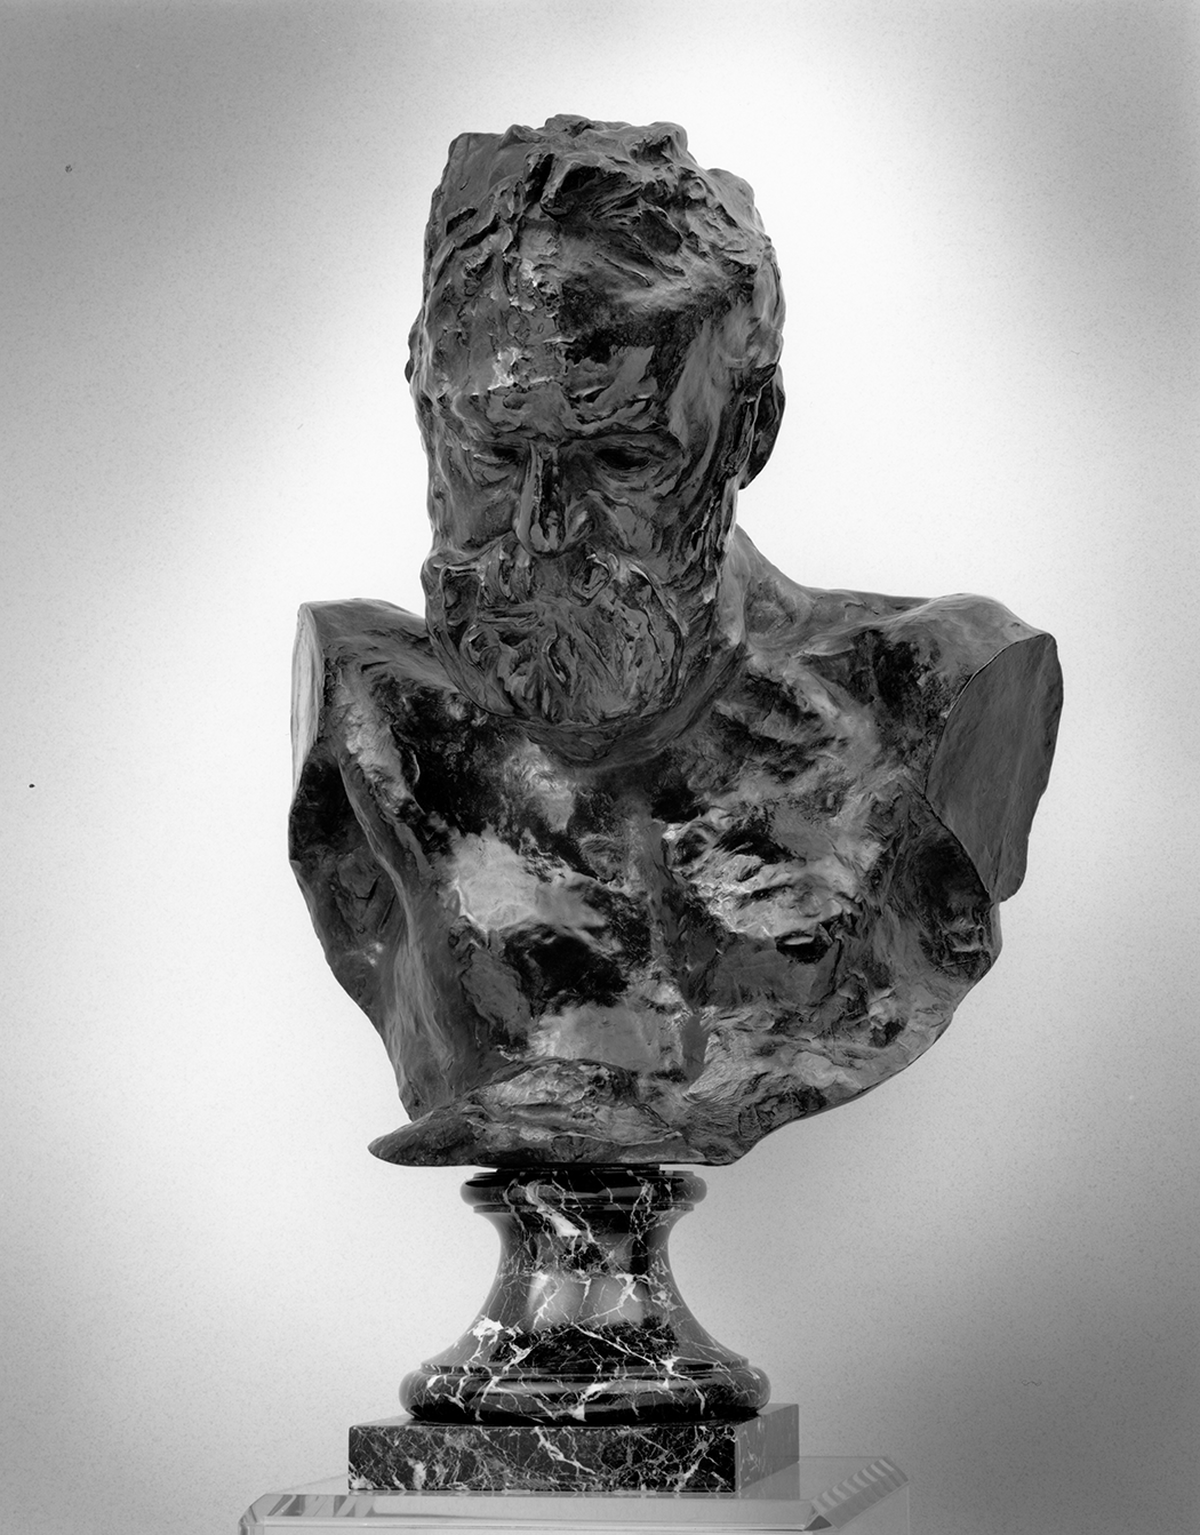 Auguste Rodin (1840-1917) created the “Heroic Bust of Victor Hugo.” The Jundt Art Museum will bring the traveling show “Rodin: Truth Form Life / Selections from the Iris and B. Gerald Cantor Collections,” featuring 22 bronze sculptures, including the “Heroic Bust of Victor Hugo” to Gonzaga from Sept. 7, 2018, to Jan. 5, 2019. (Cantor Collections)